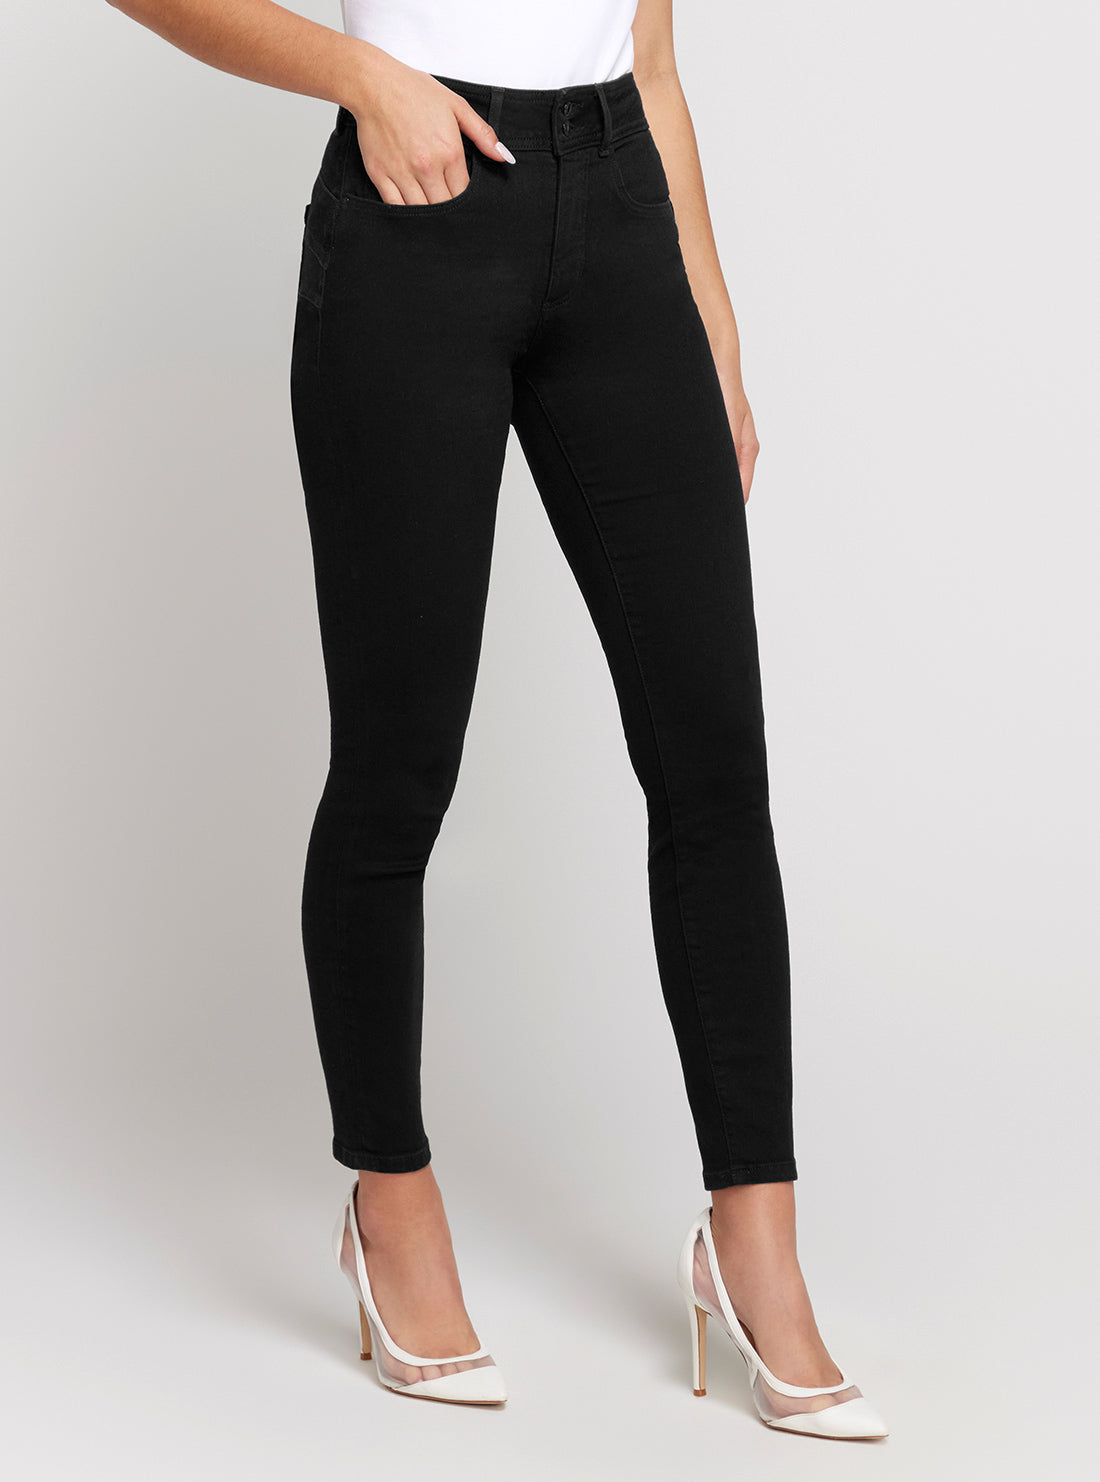 High-Rise Shape Up Denim Jeans in Carrie Black Wash